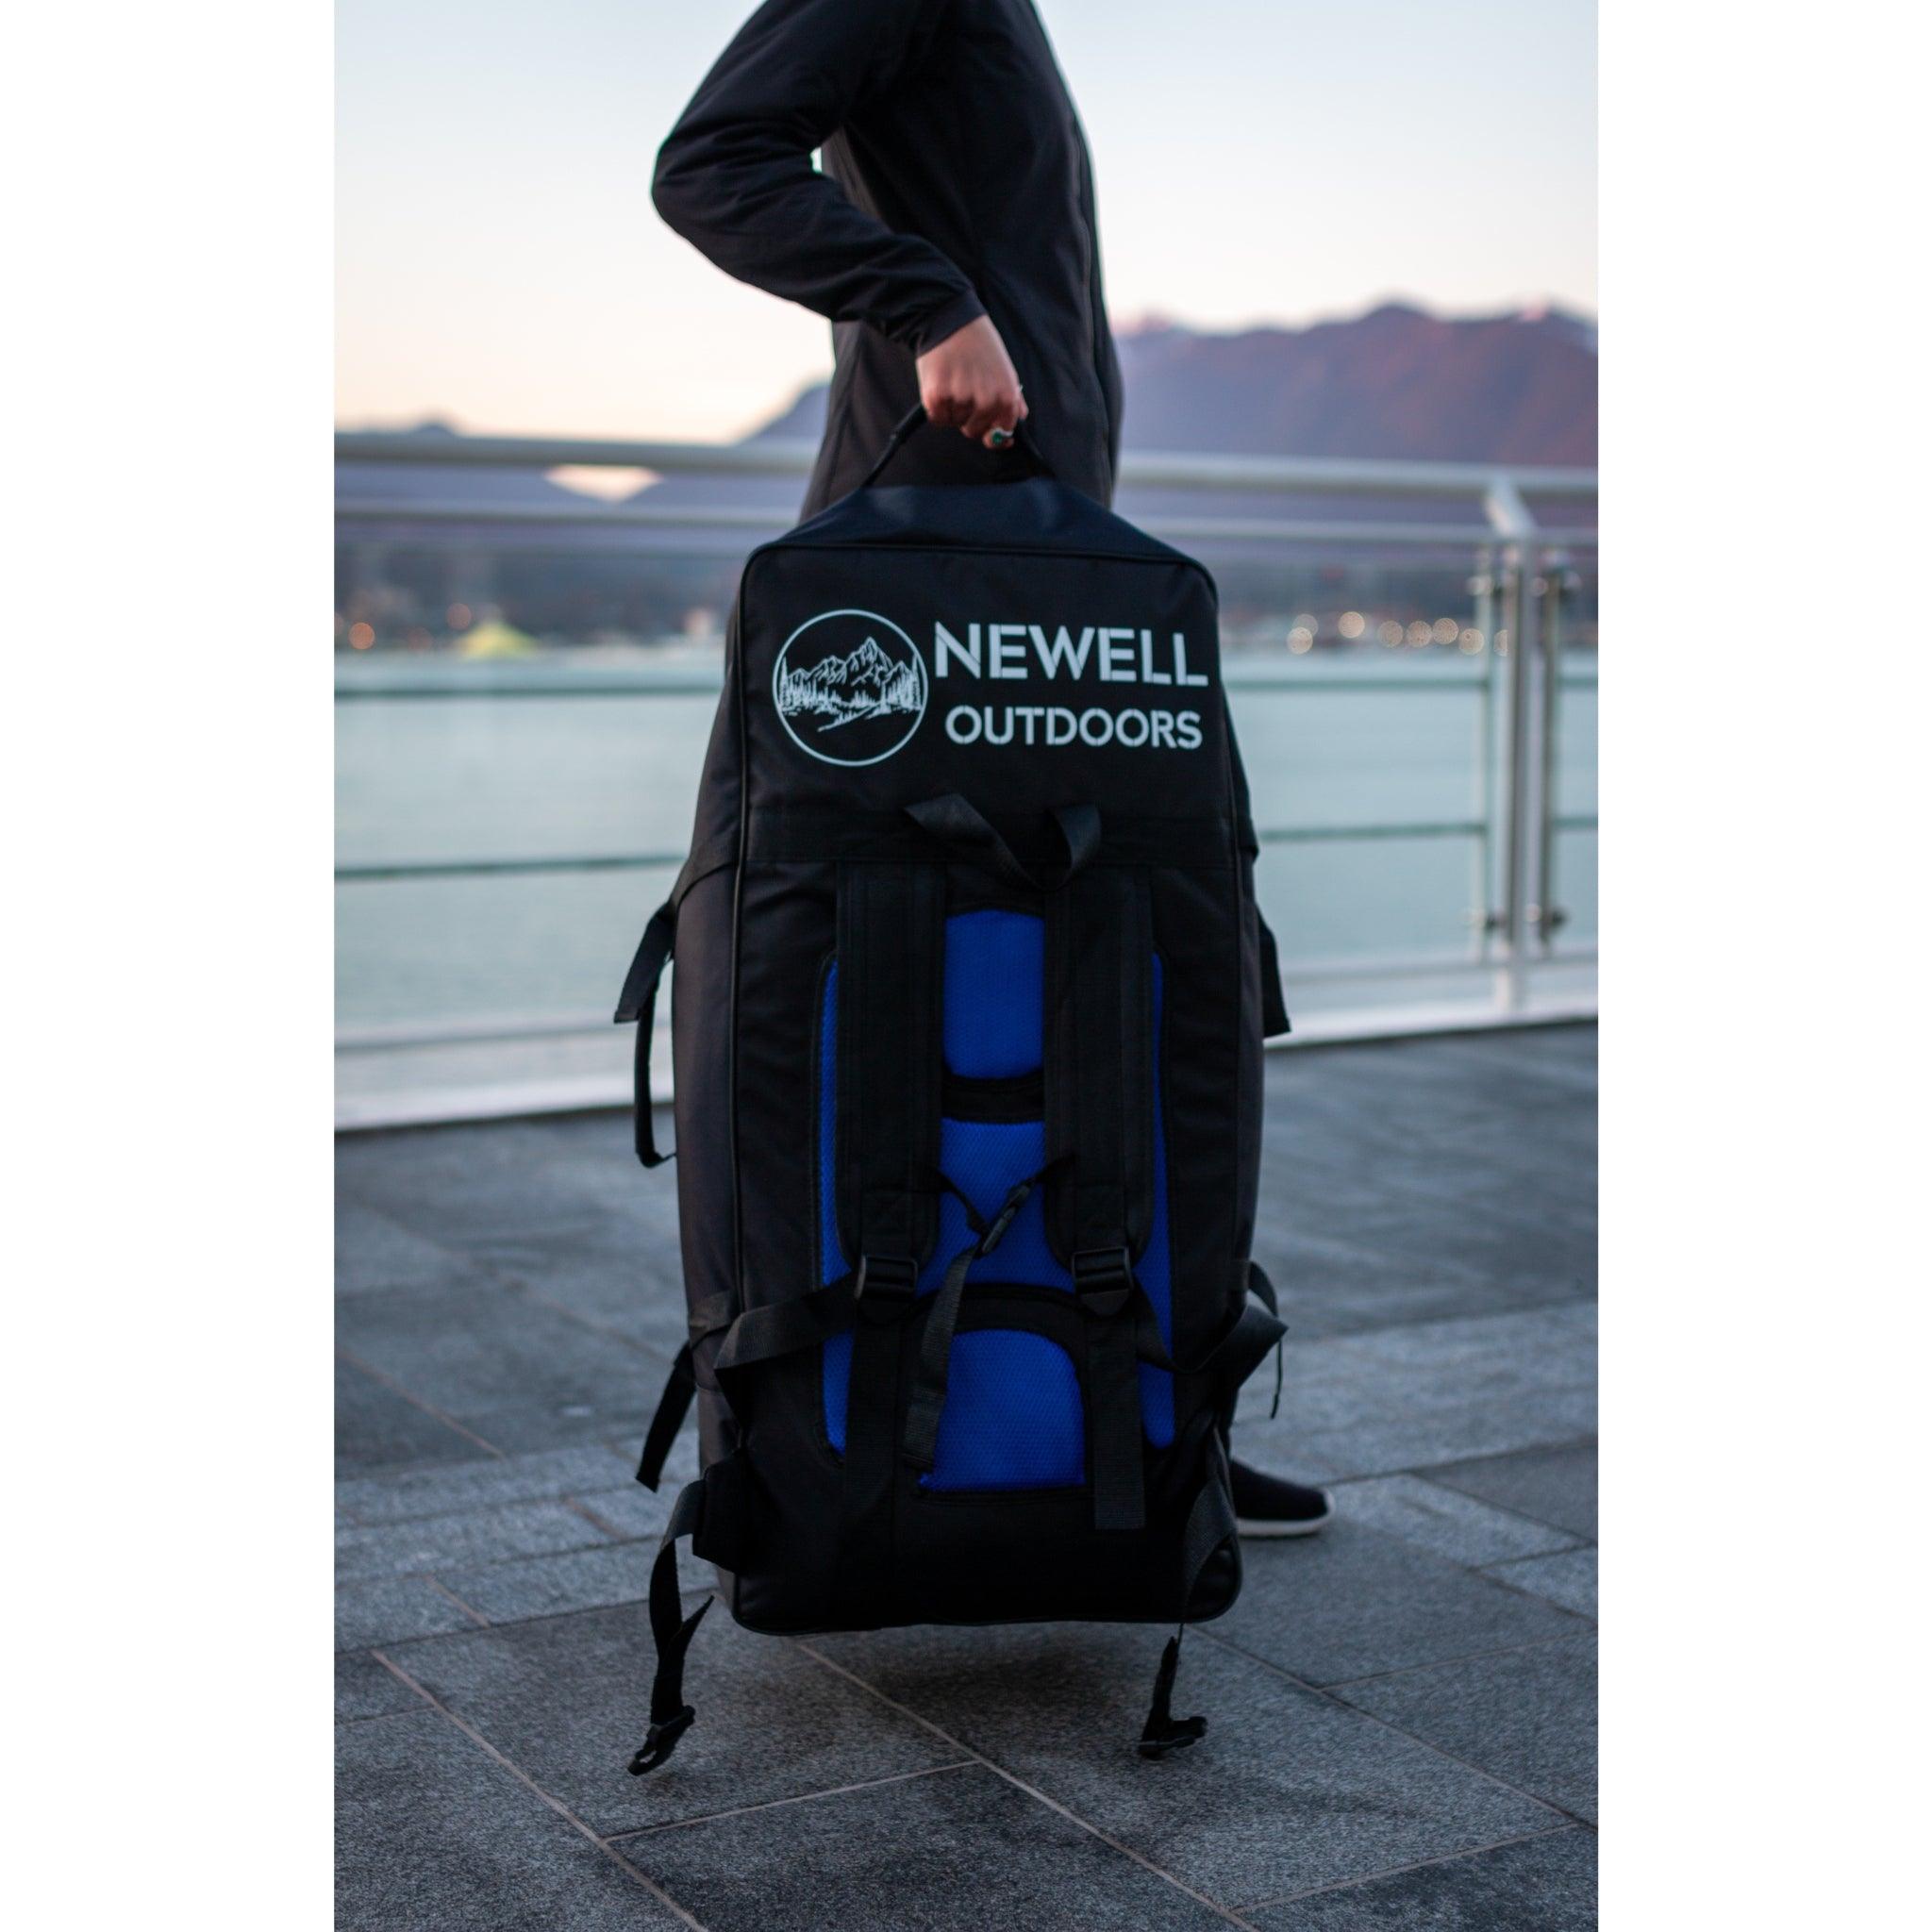 The Wippersnapper paddleboard bag Newell Outdoors.